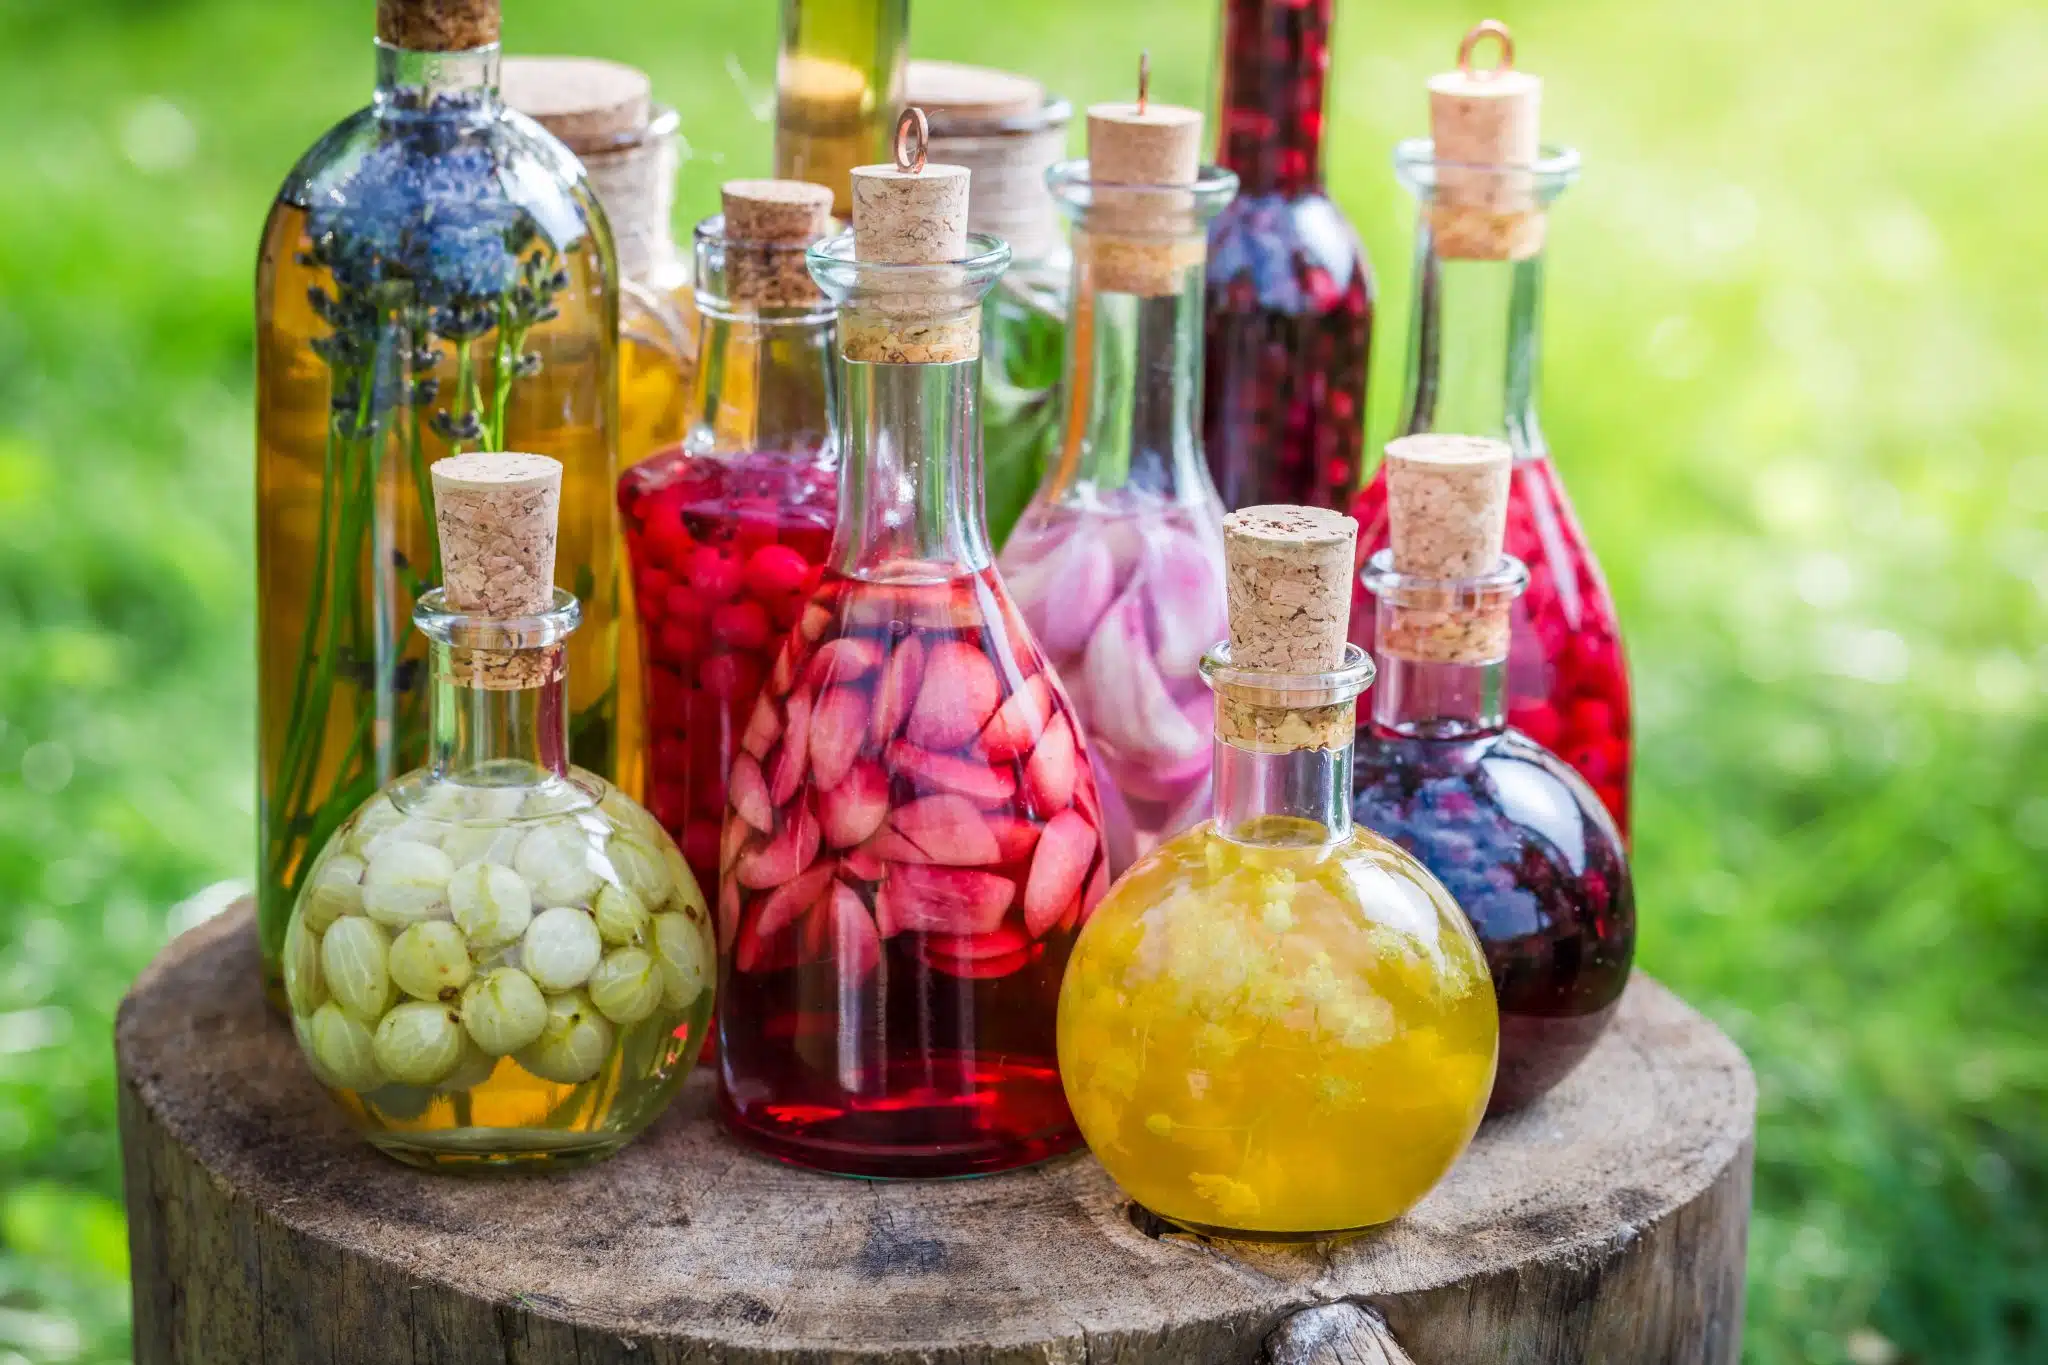 A shot of many clear bottles with corks filled with fruits and liqueurs, standing on a wooden stump with a green background.